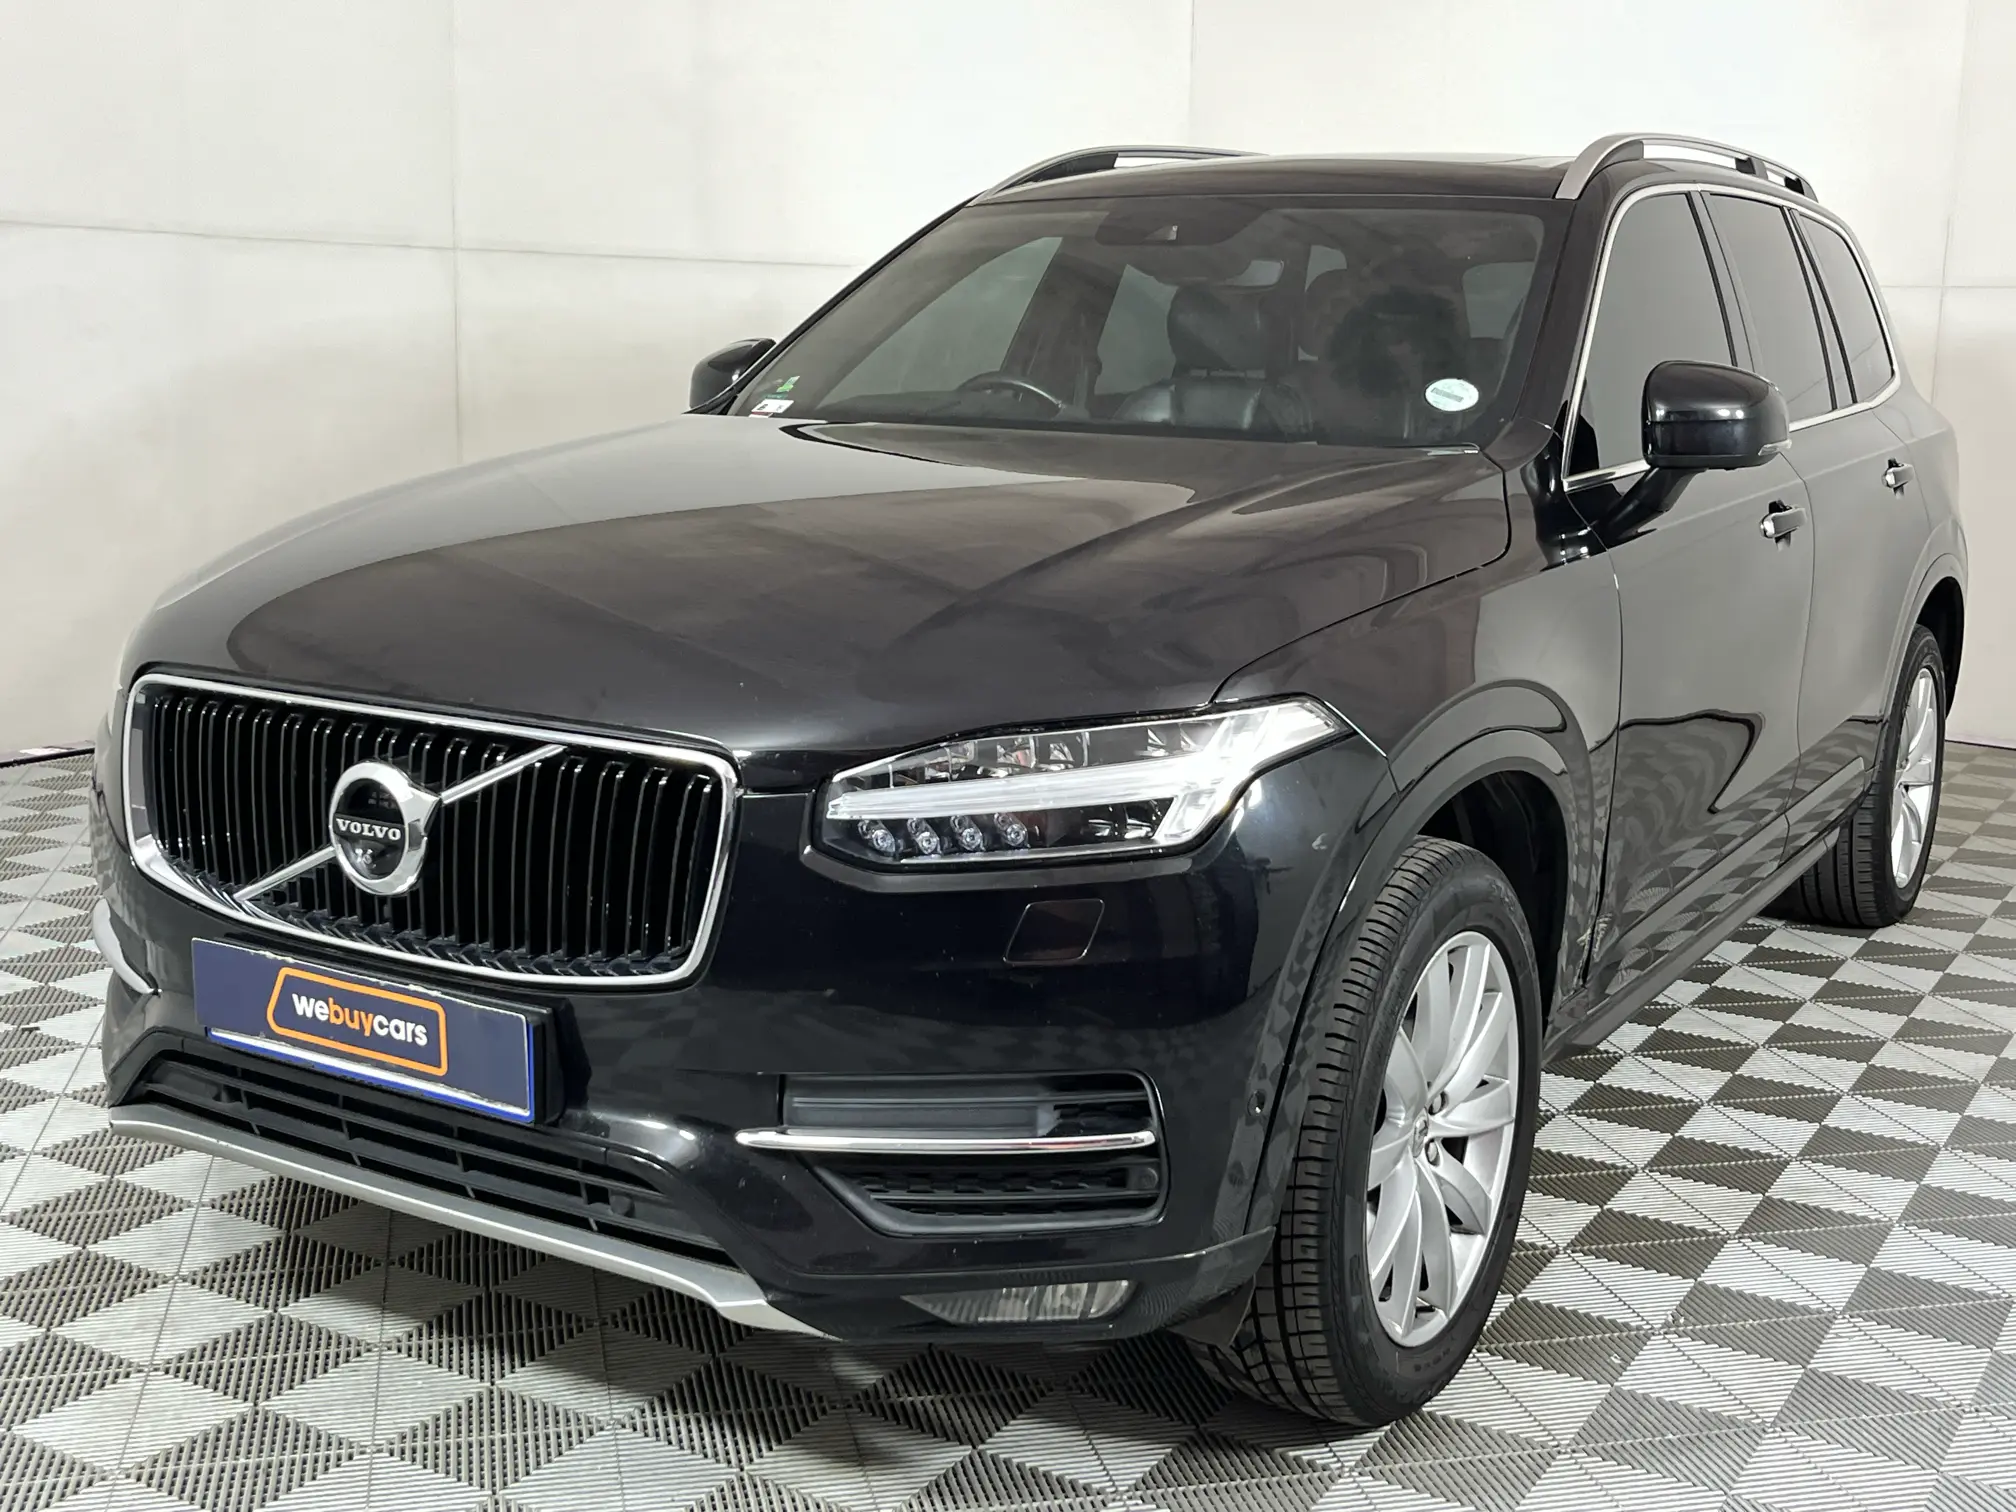 2016 Volvo XC 90 D5 Geartronic Executive AWD